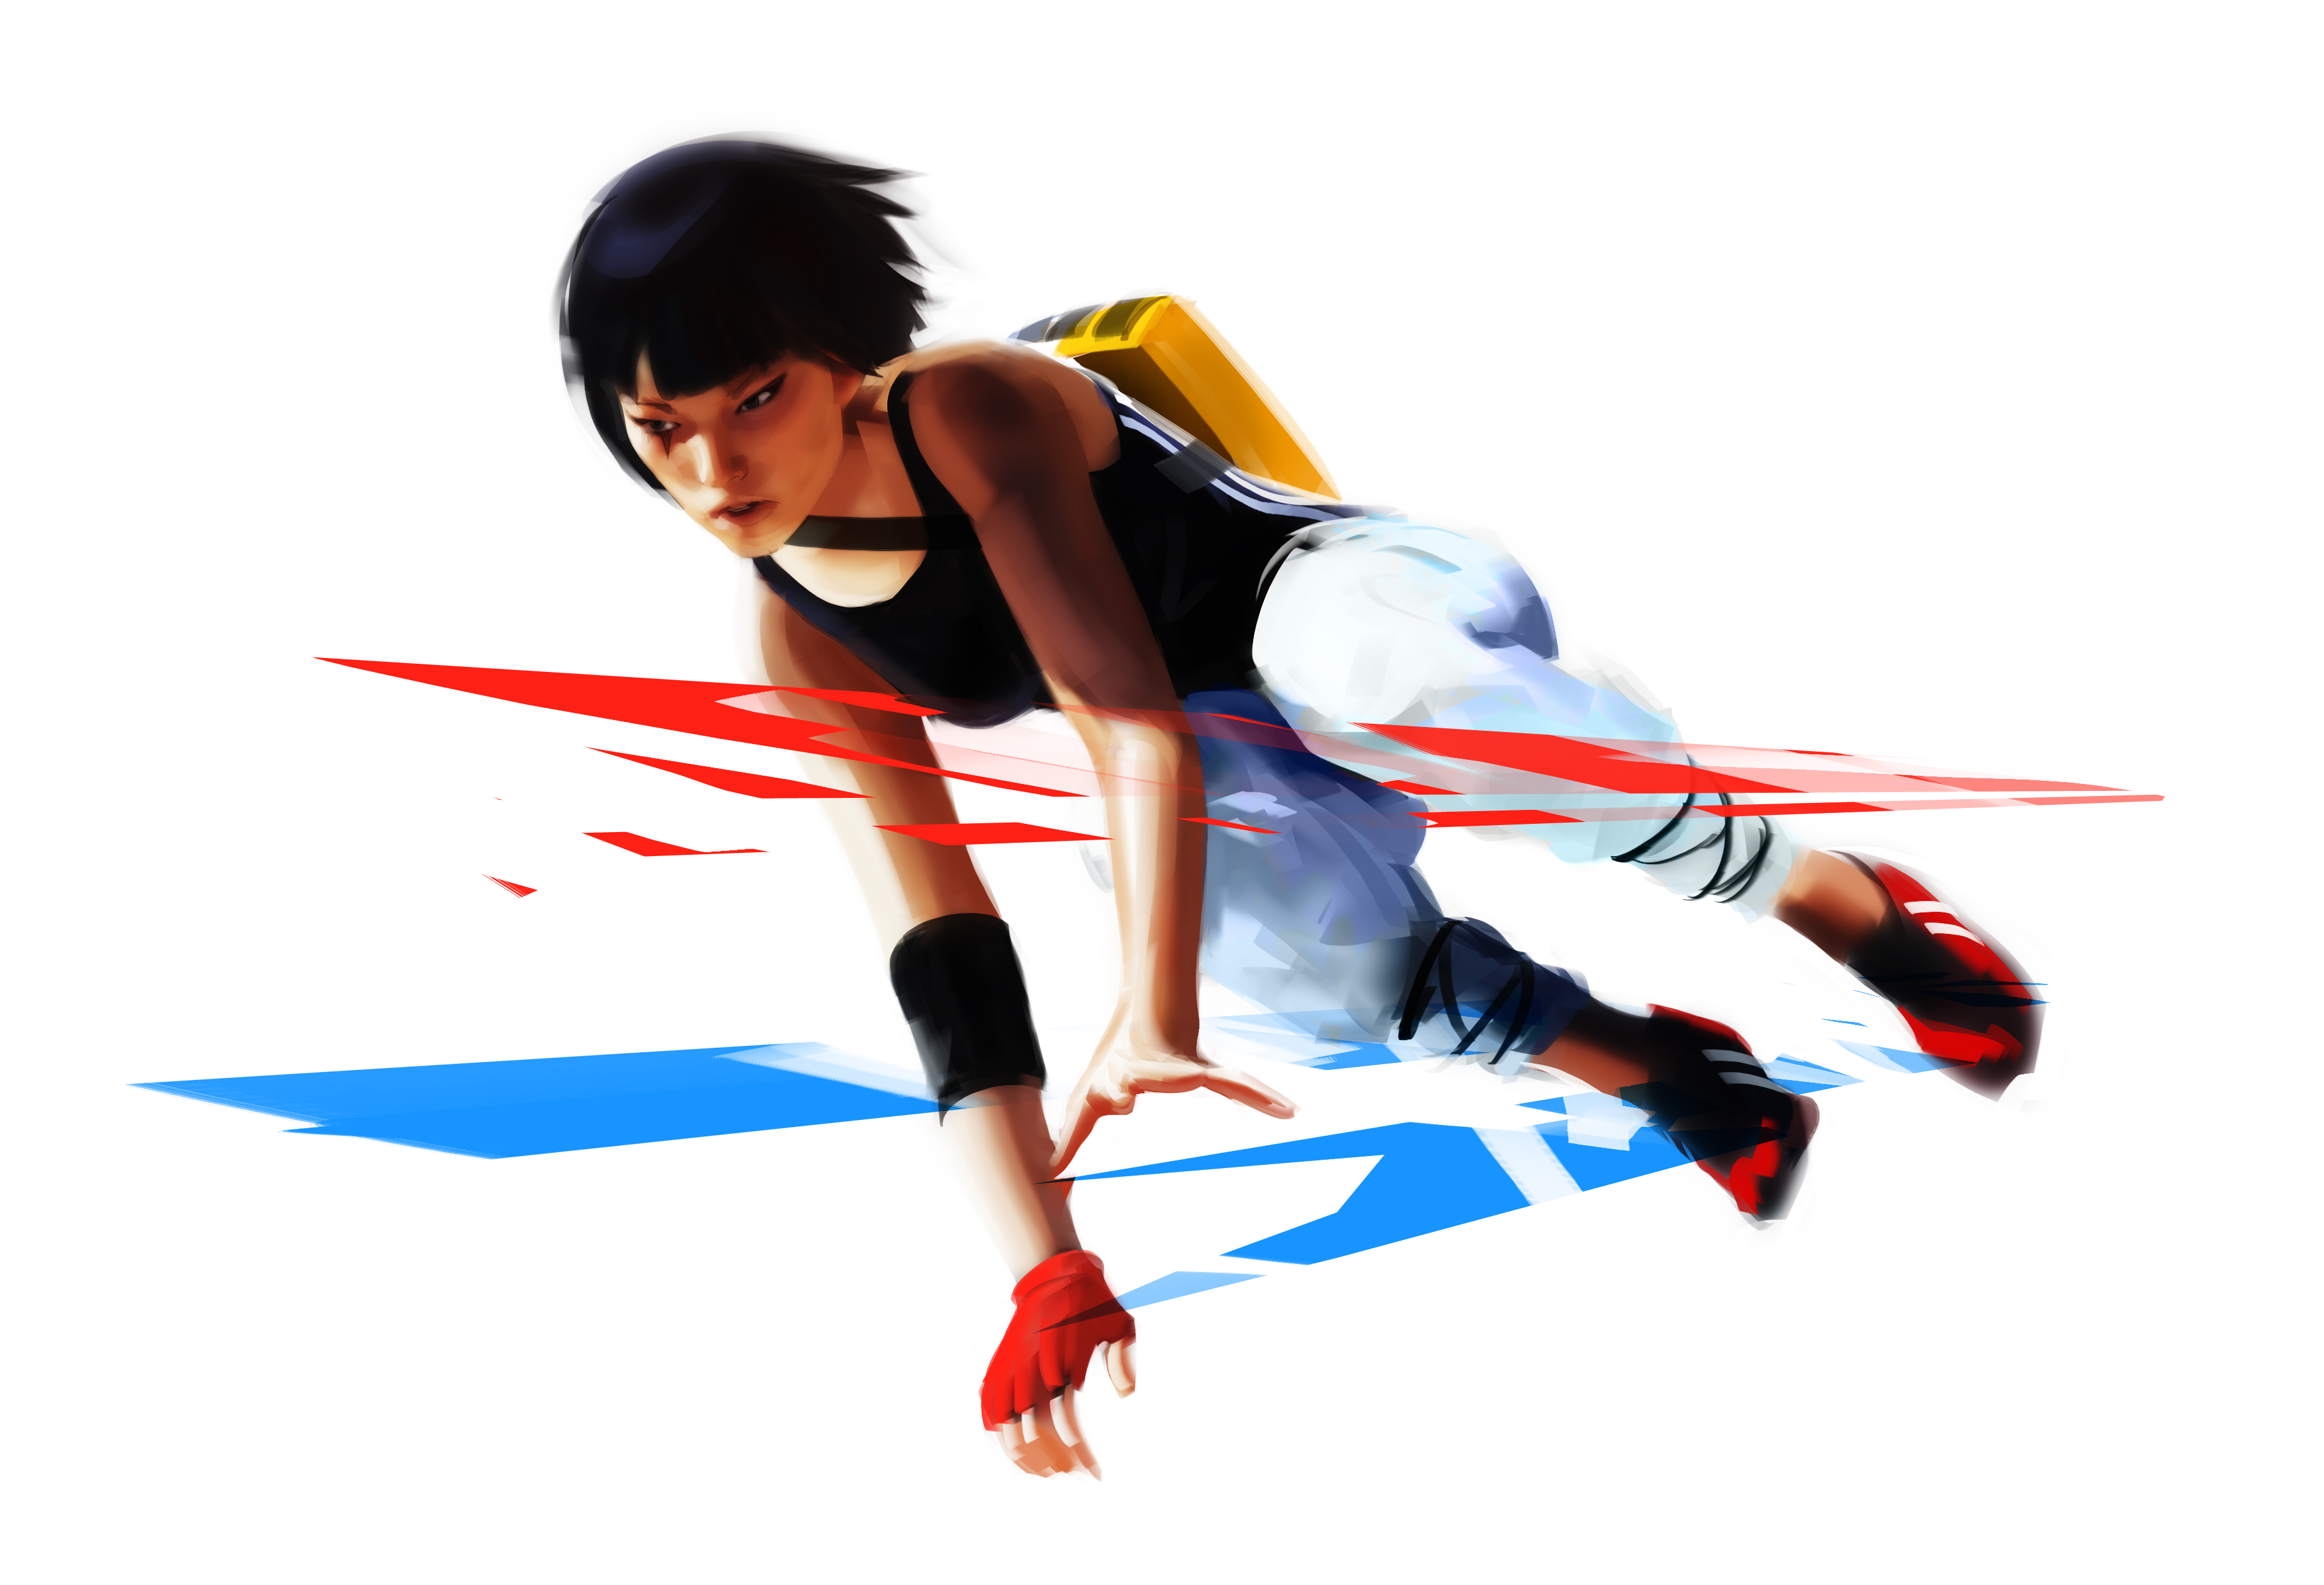 Mirror's Edge Full HD Wallpaper and Background Image | 3672x2505 | ID:64091